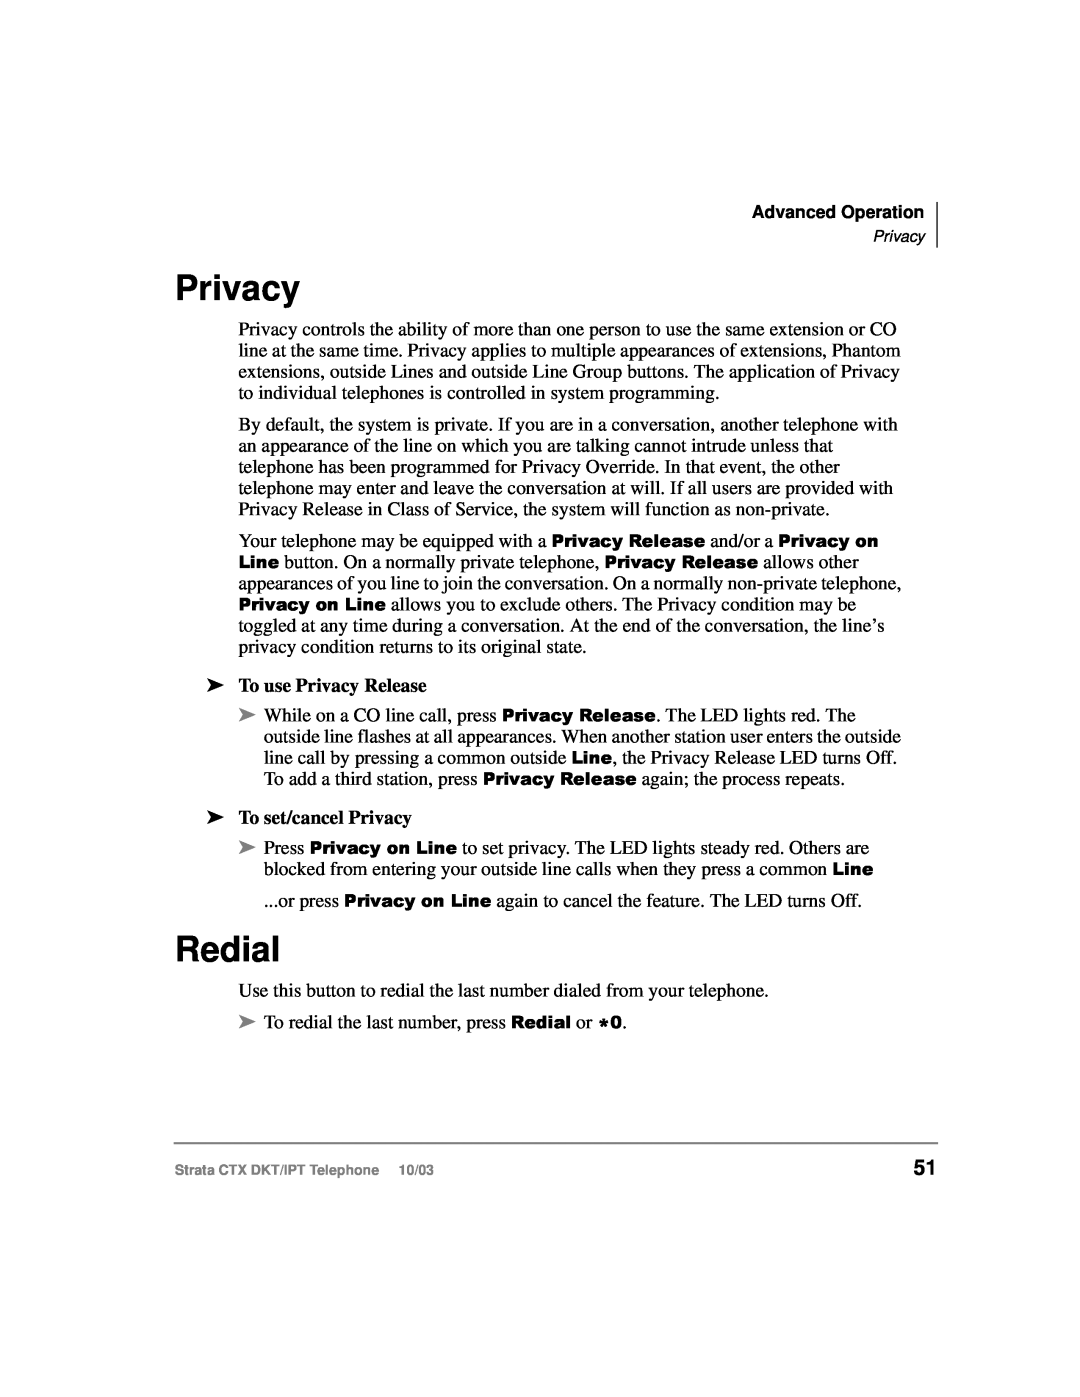 Toshiba DKT, IPT manual Redial, To use Privacy Release, To set/cancel Privacy 